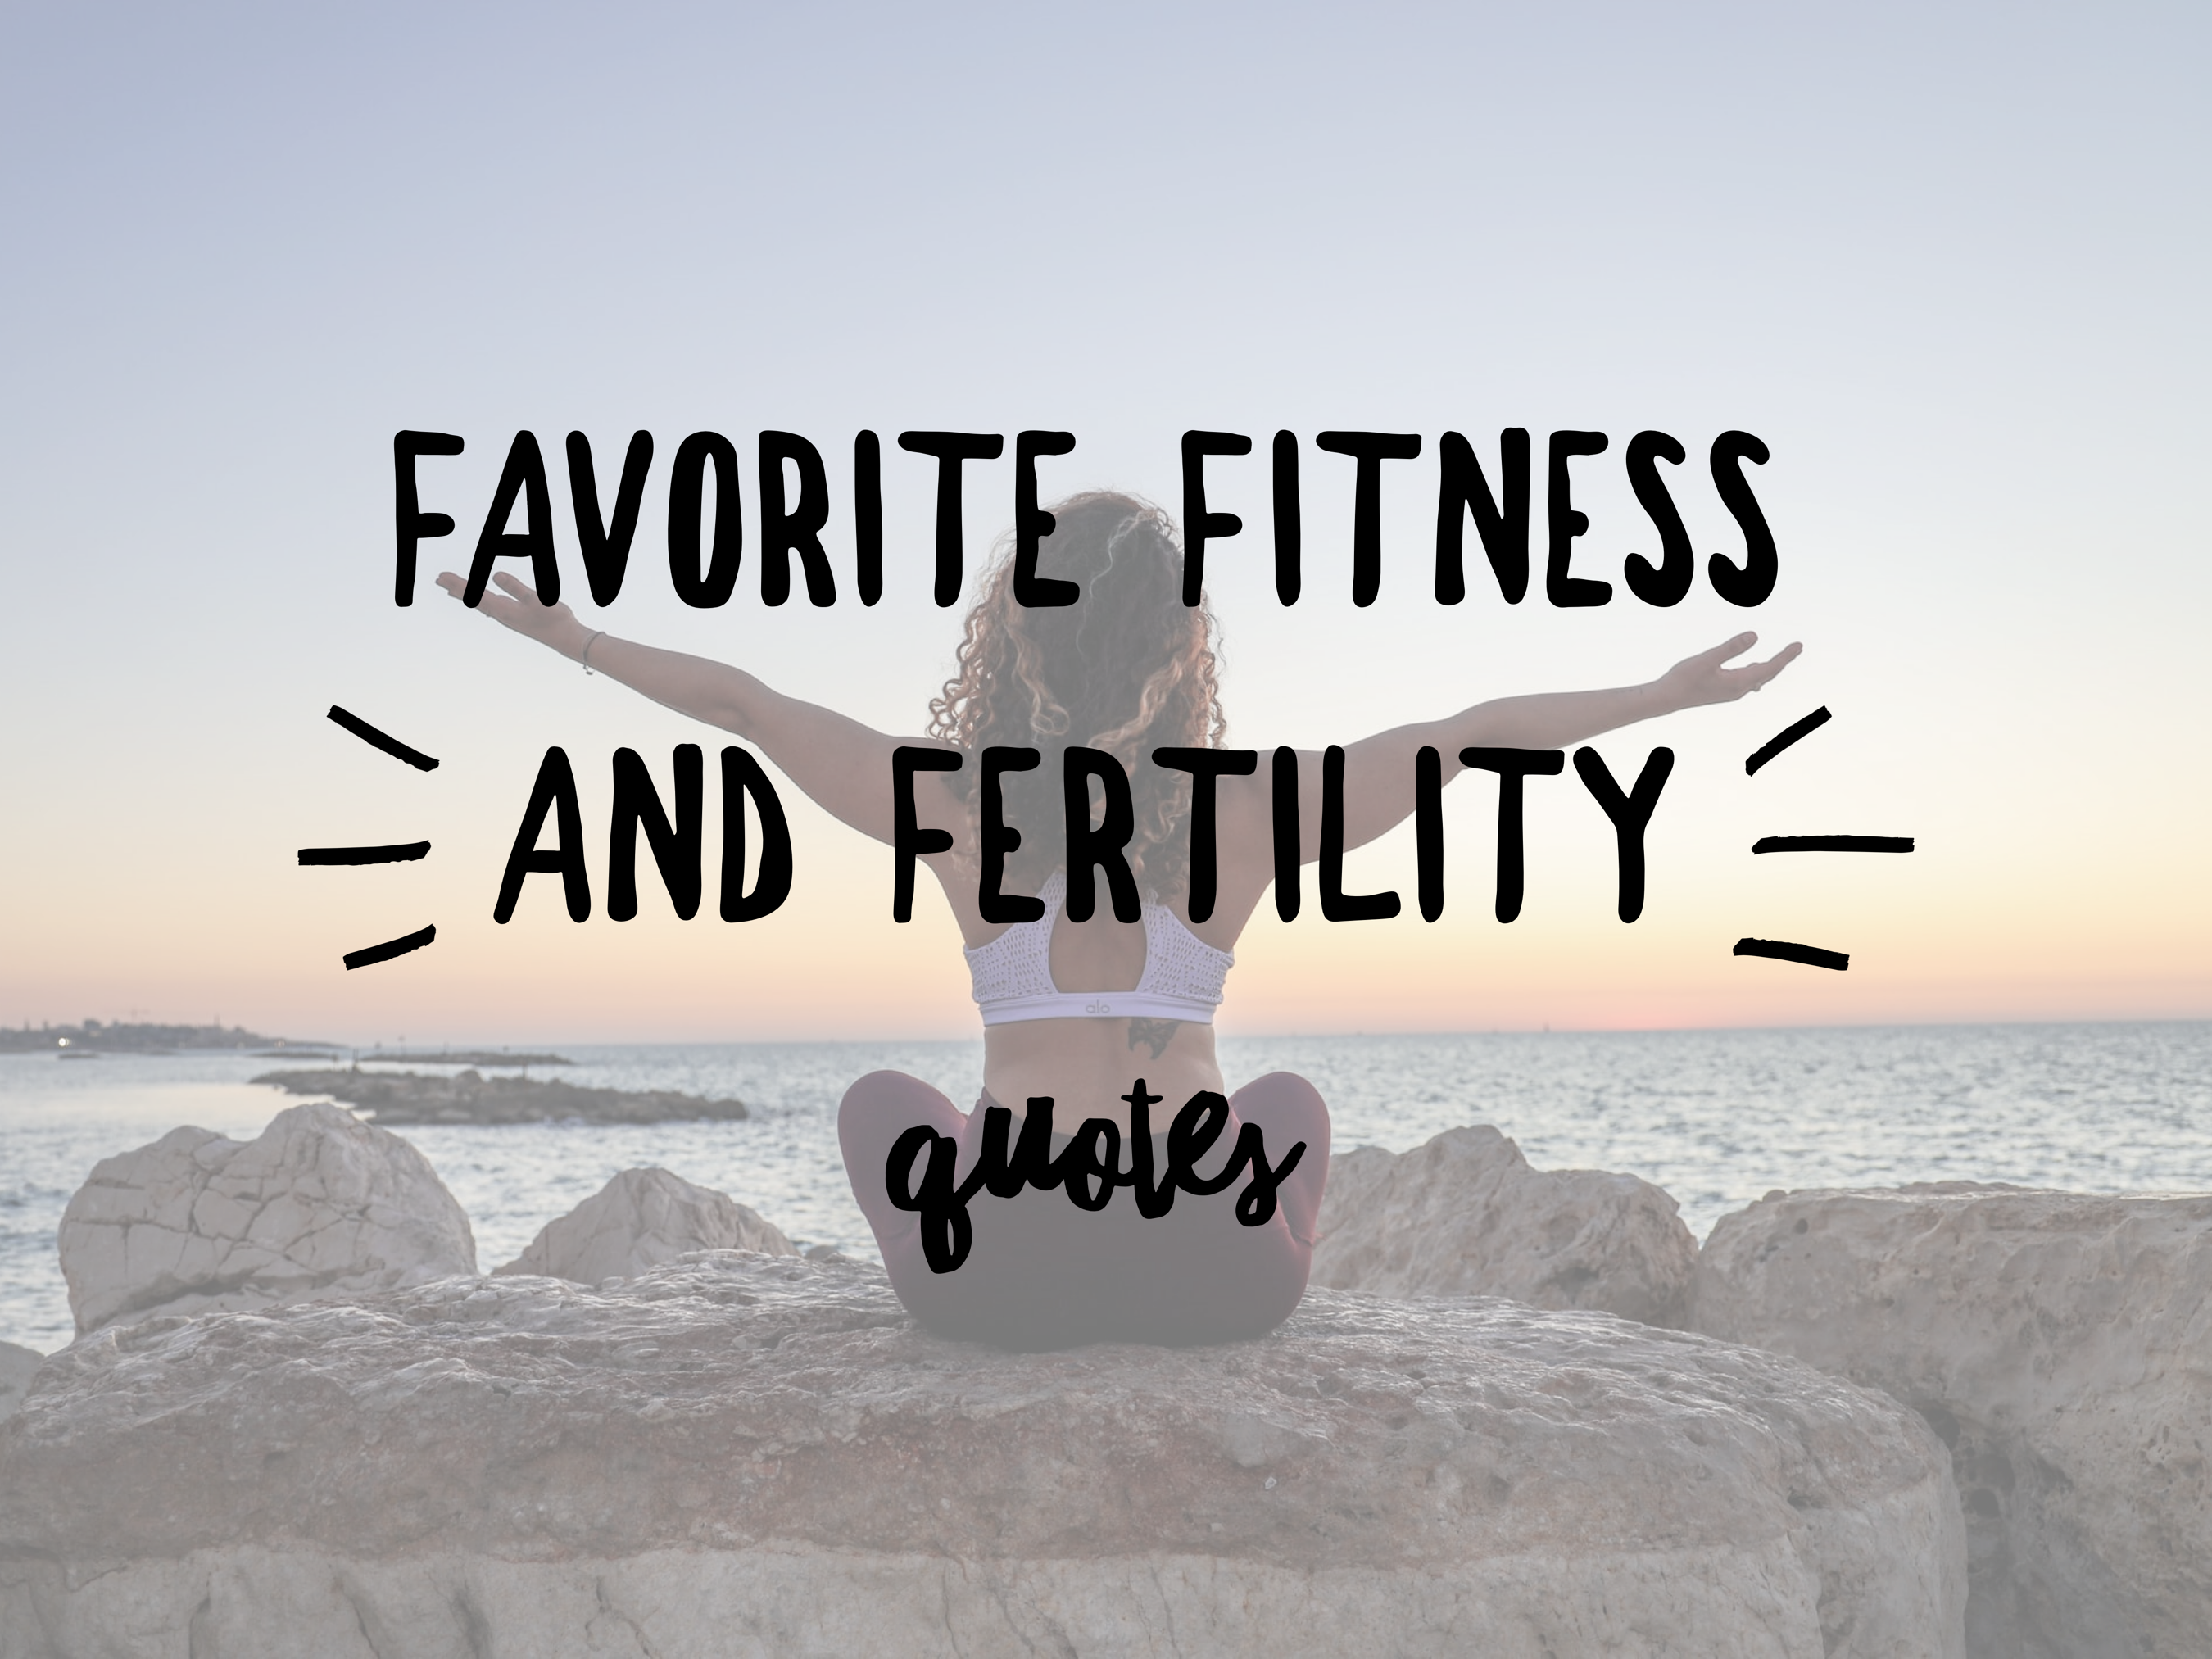 favorite fitness and fertility quotes